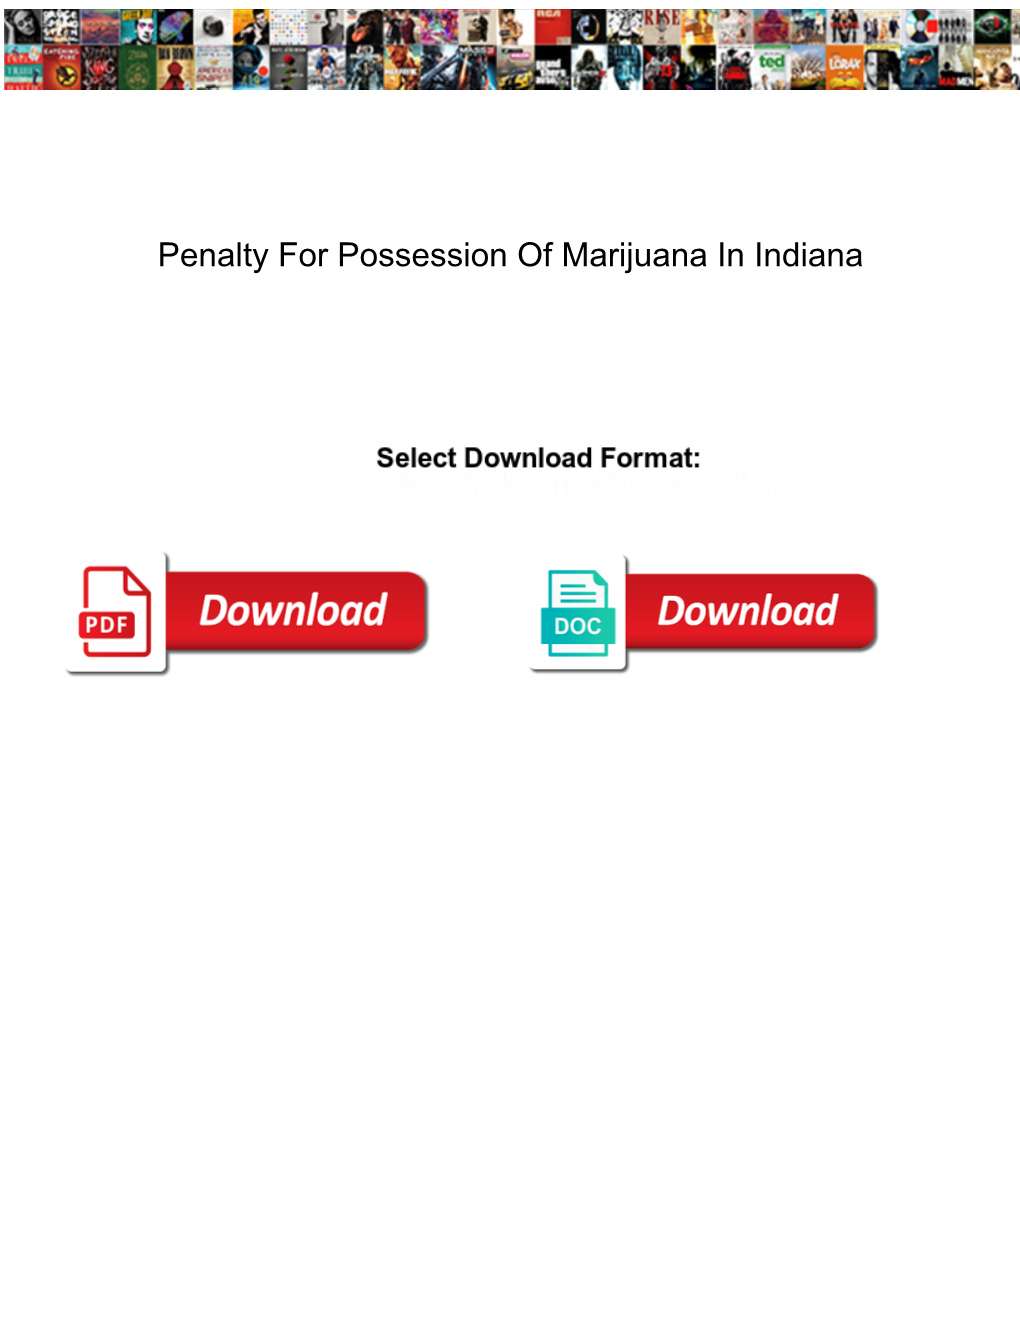 Penalty for Possession of Marijuana in Indiana